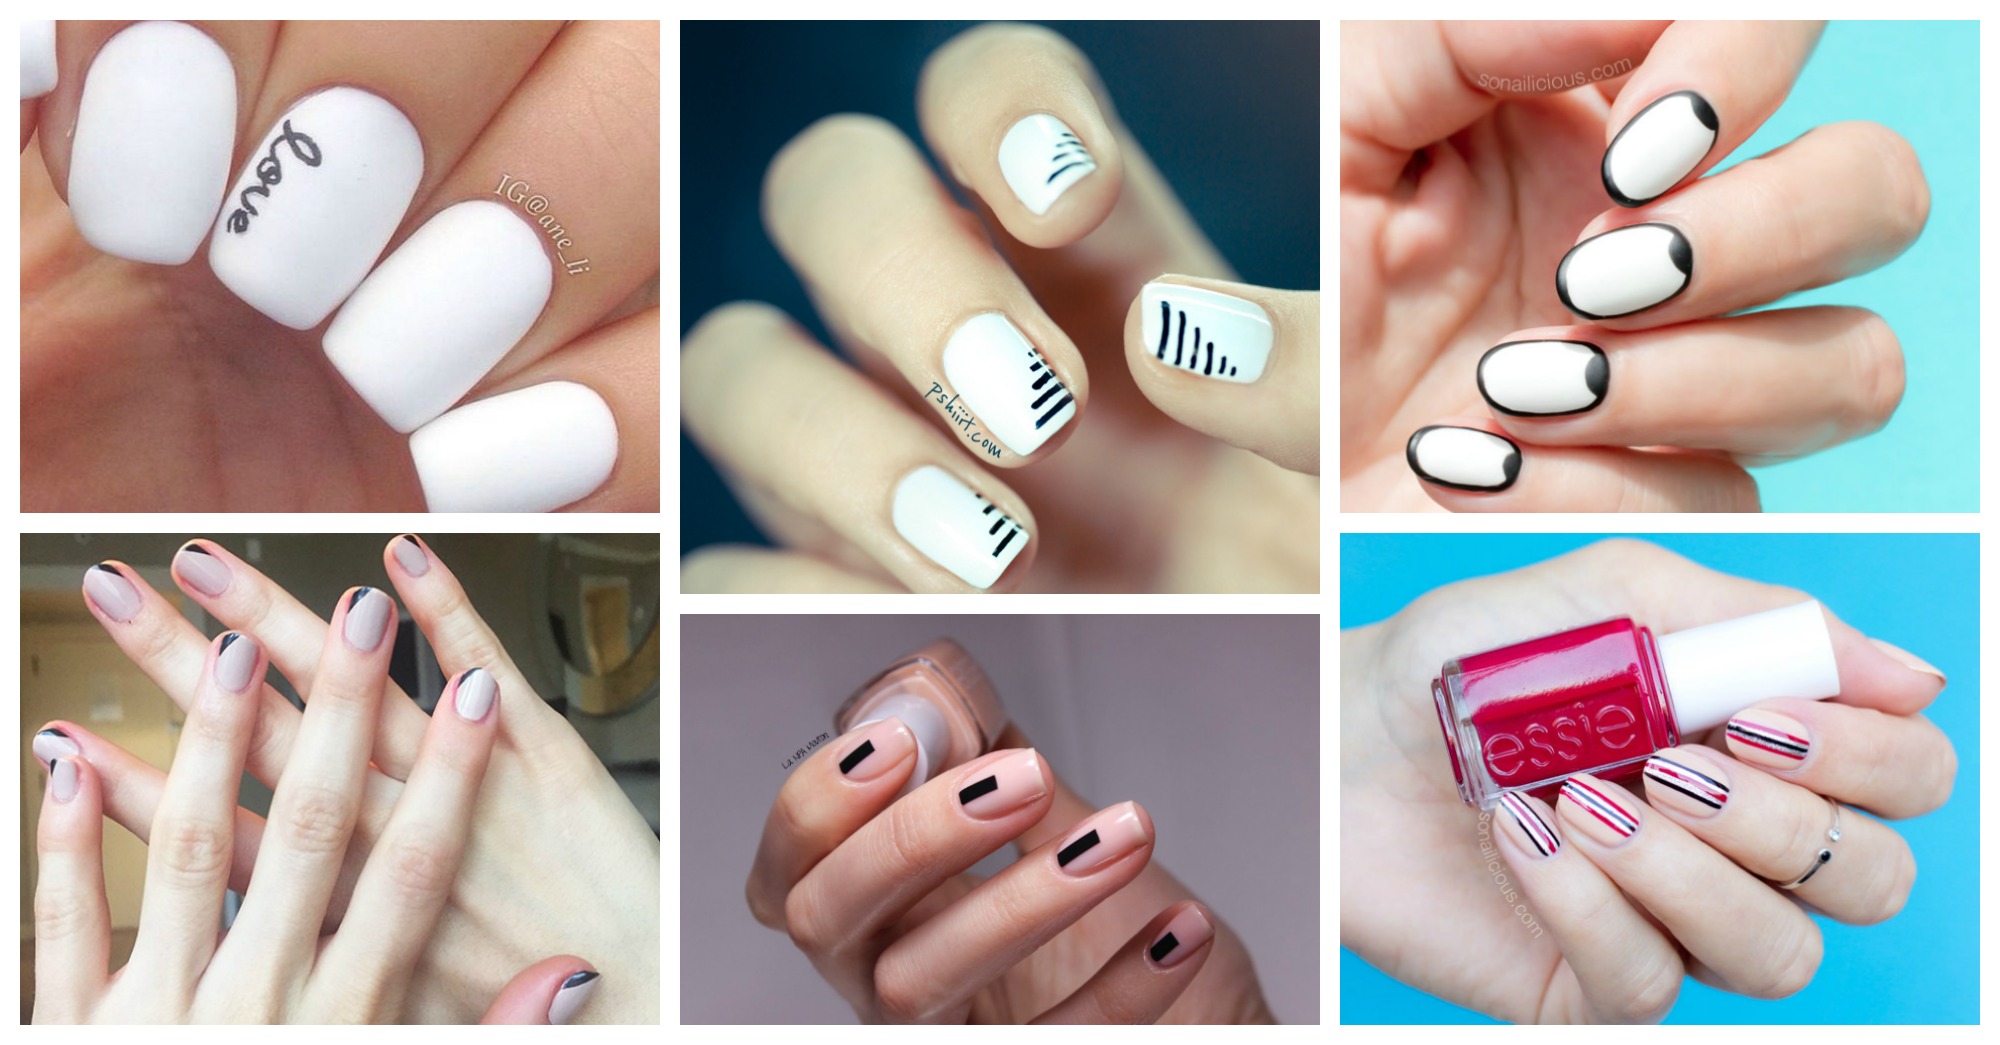 9. "Minimalist Pointy Nail Designs for a Sleek Look" - wide 2